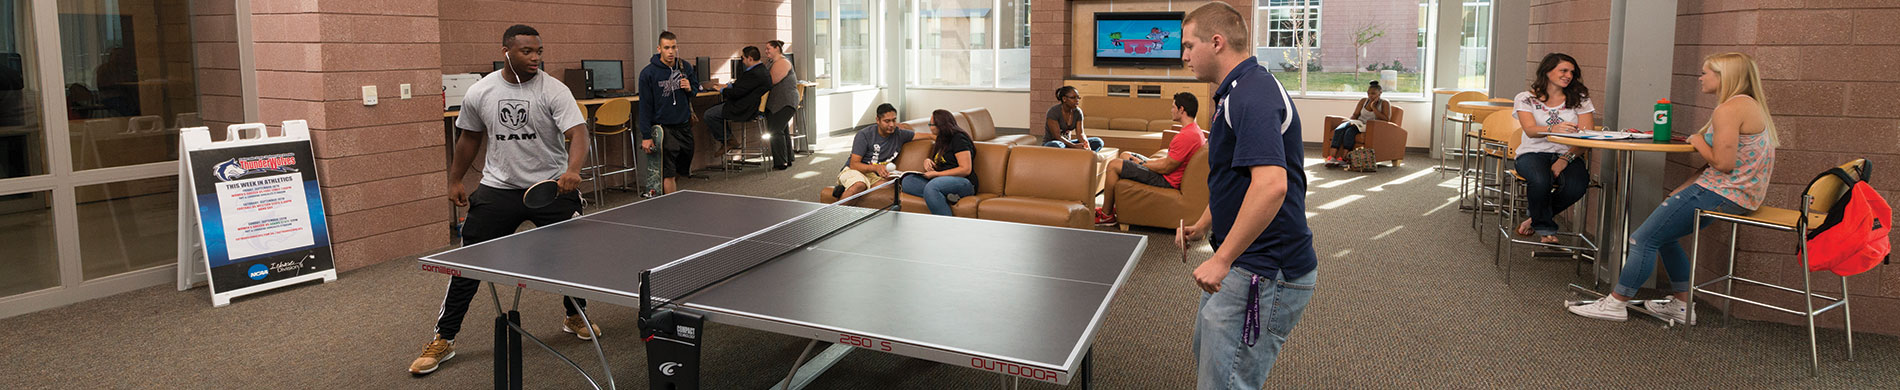 Residents playing ping-pong in Culebra Hall